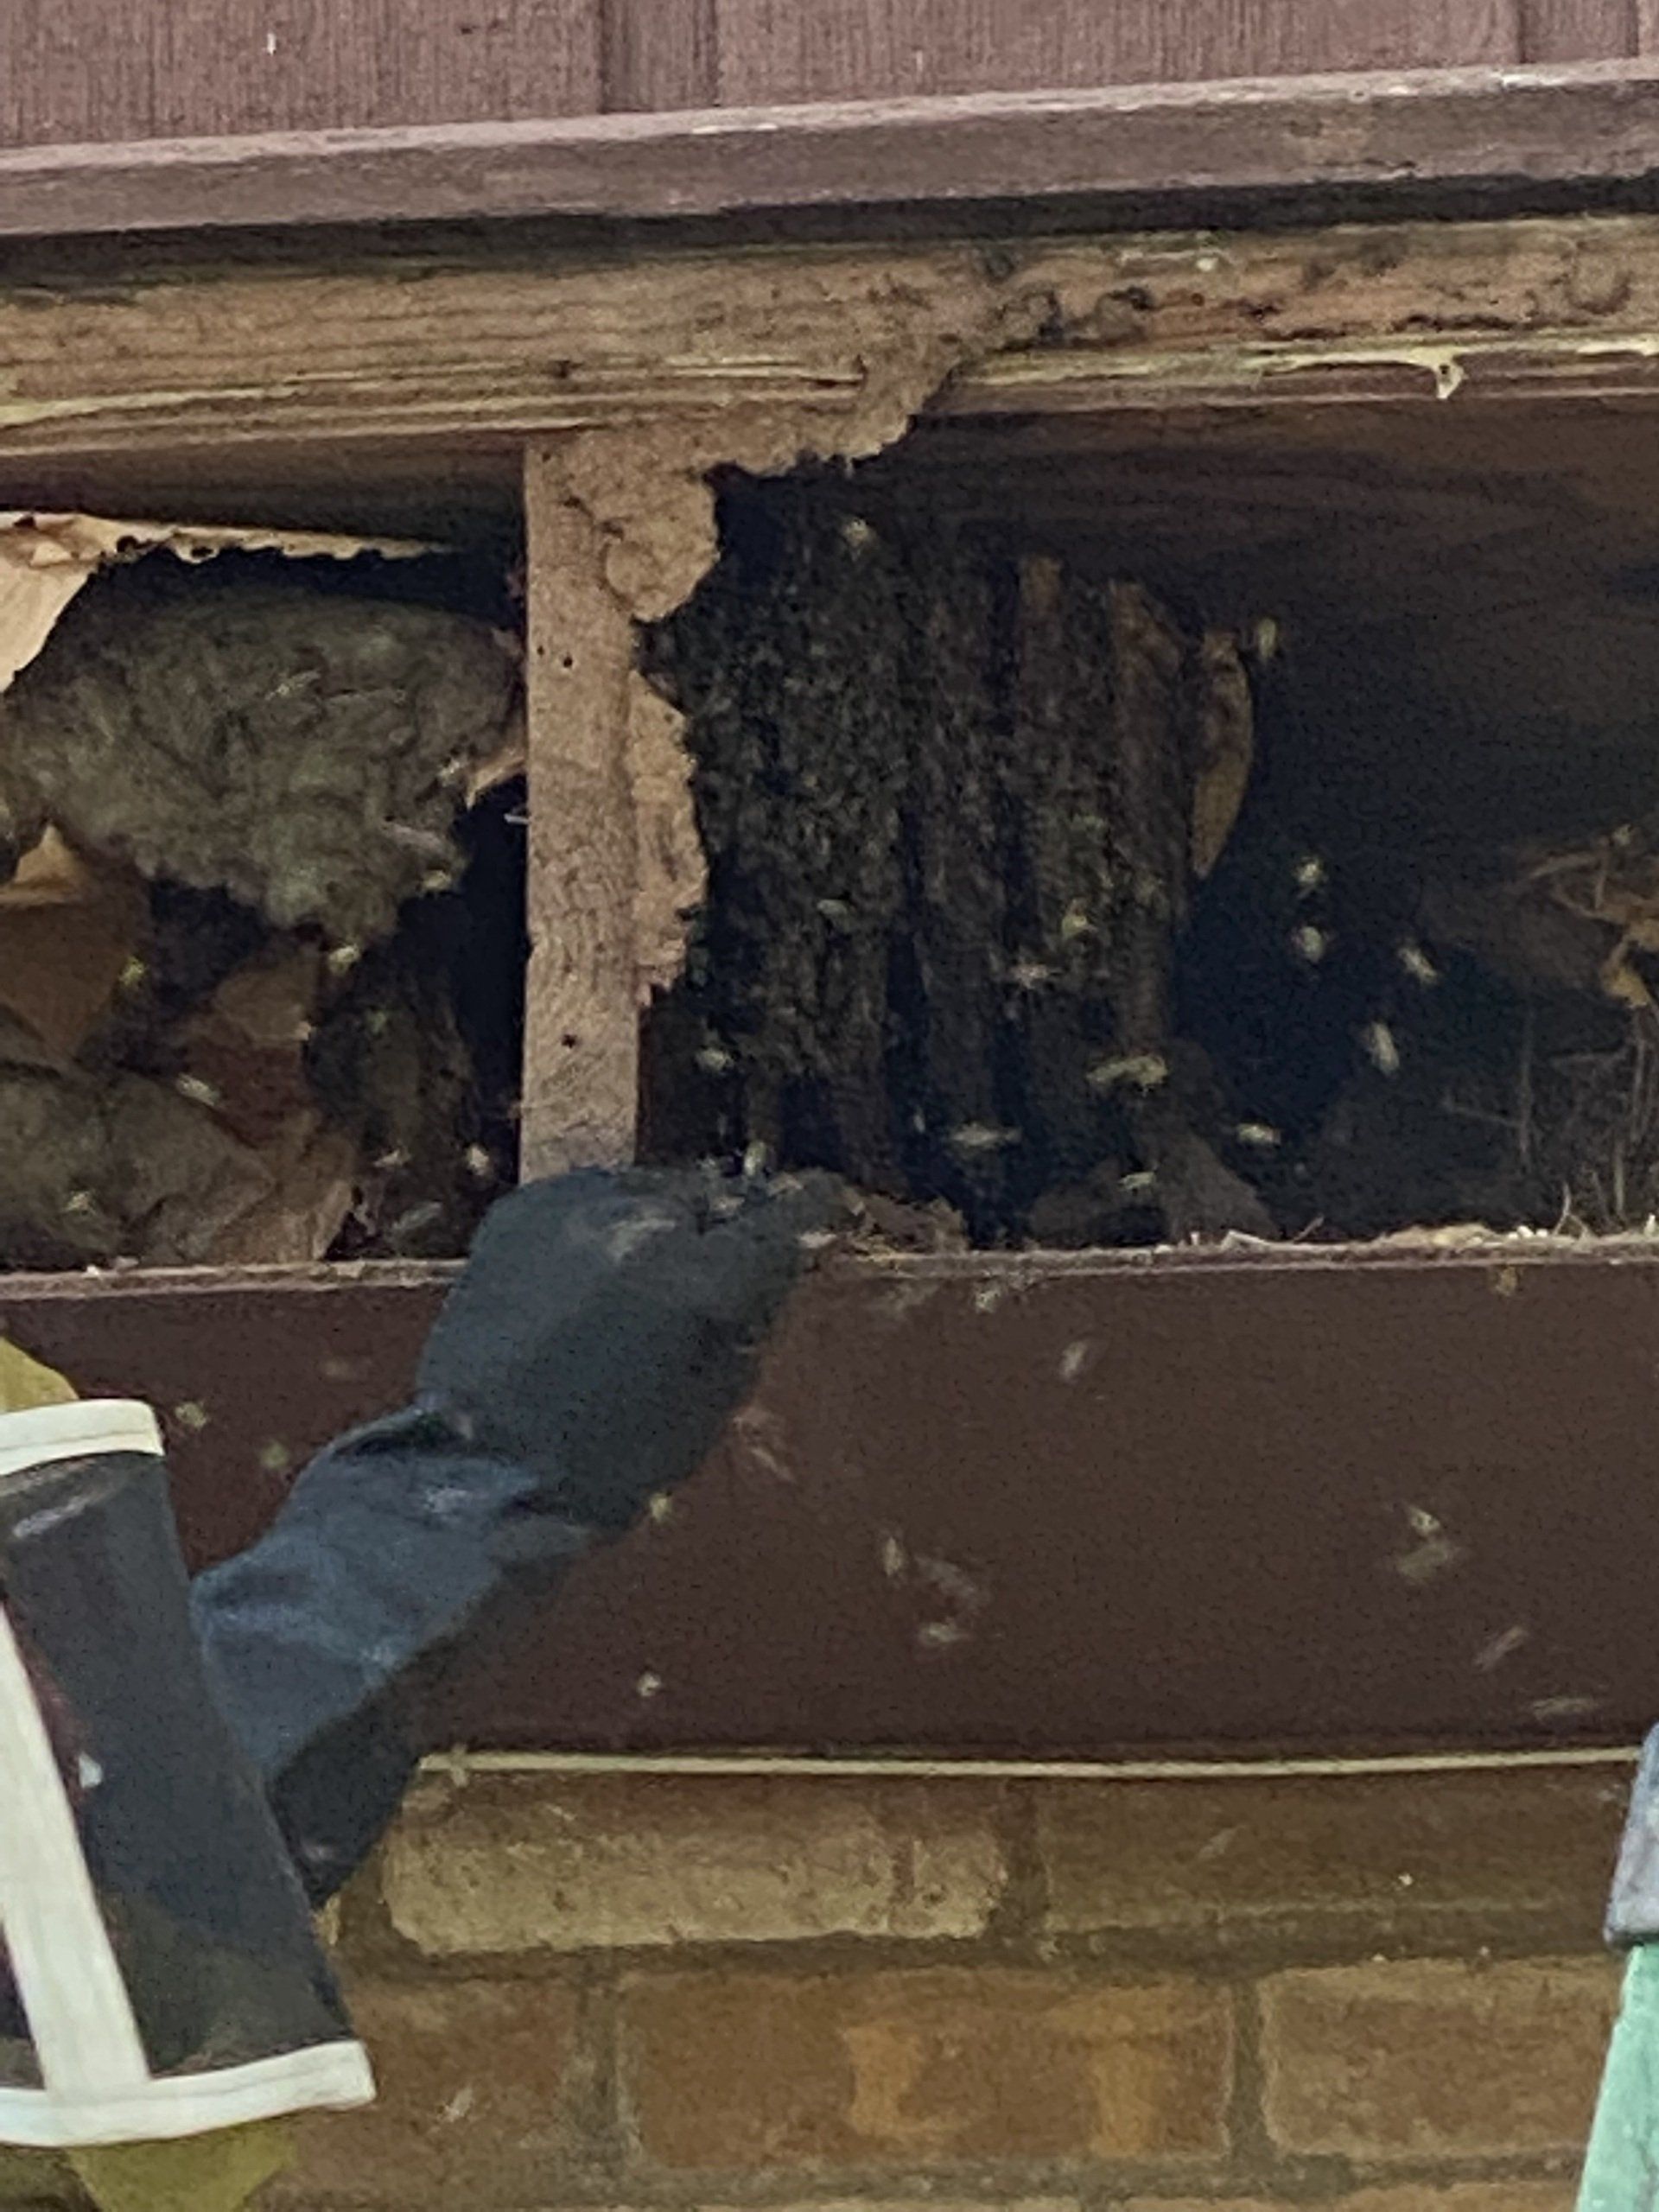 bees removal